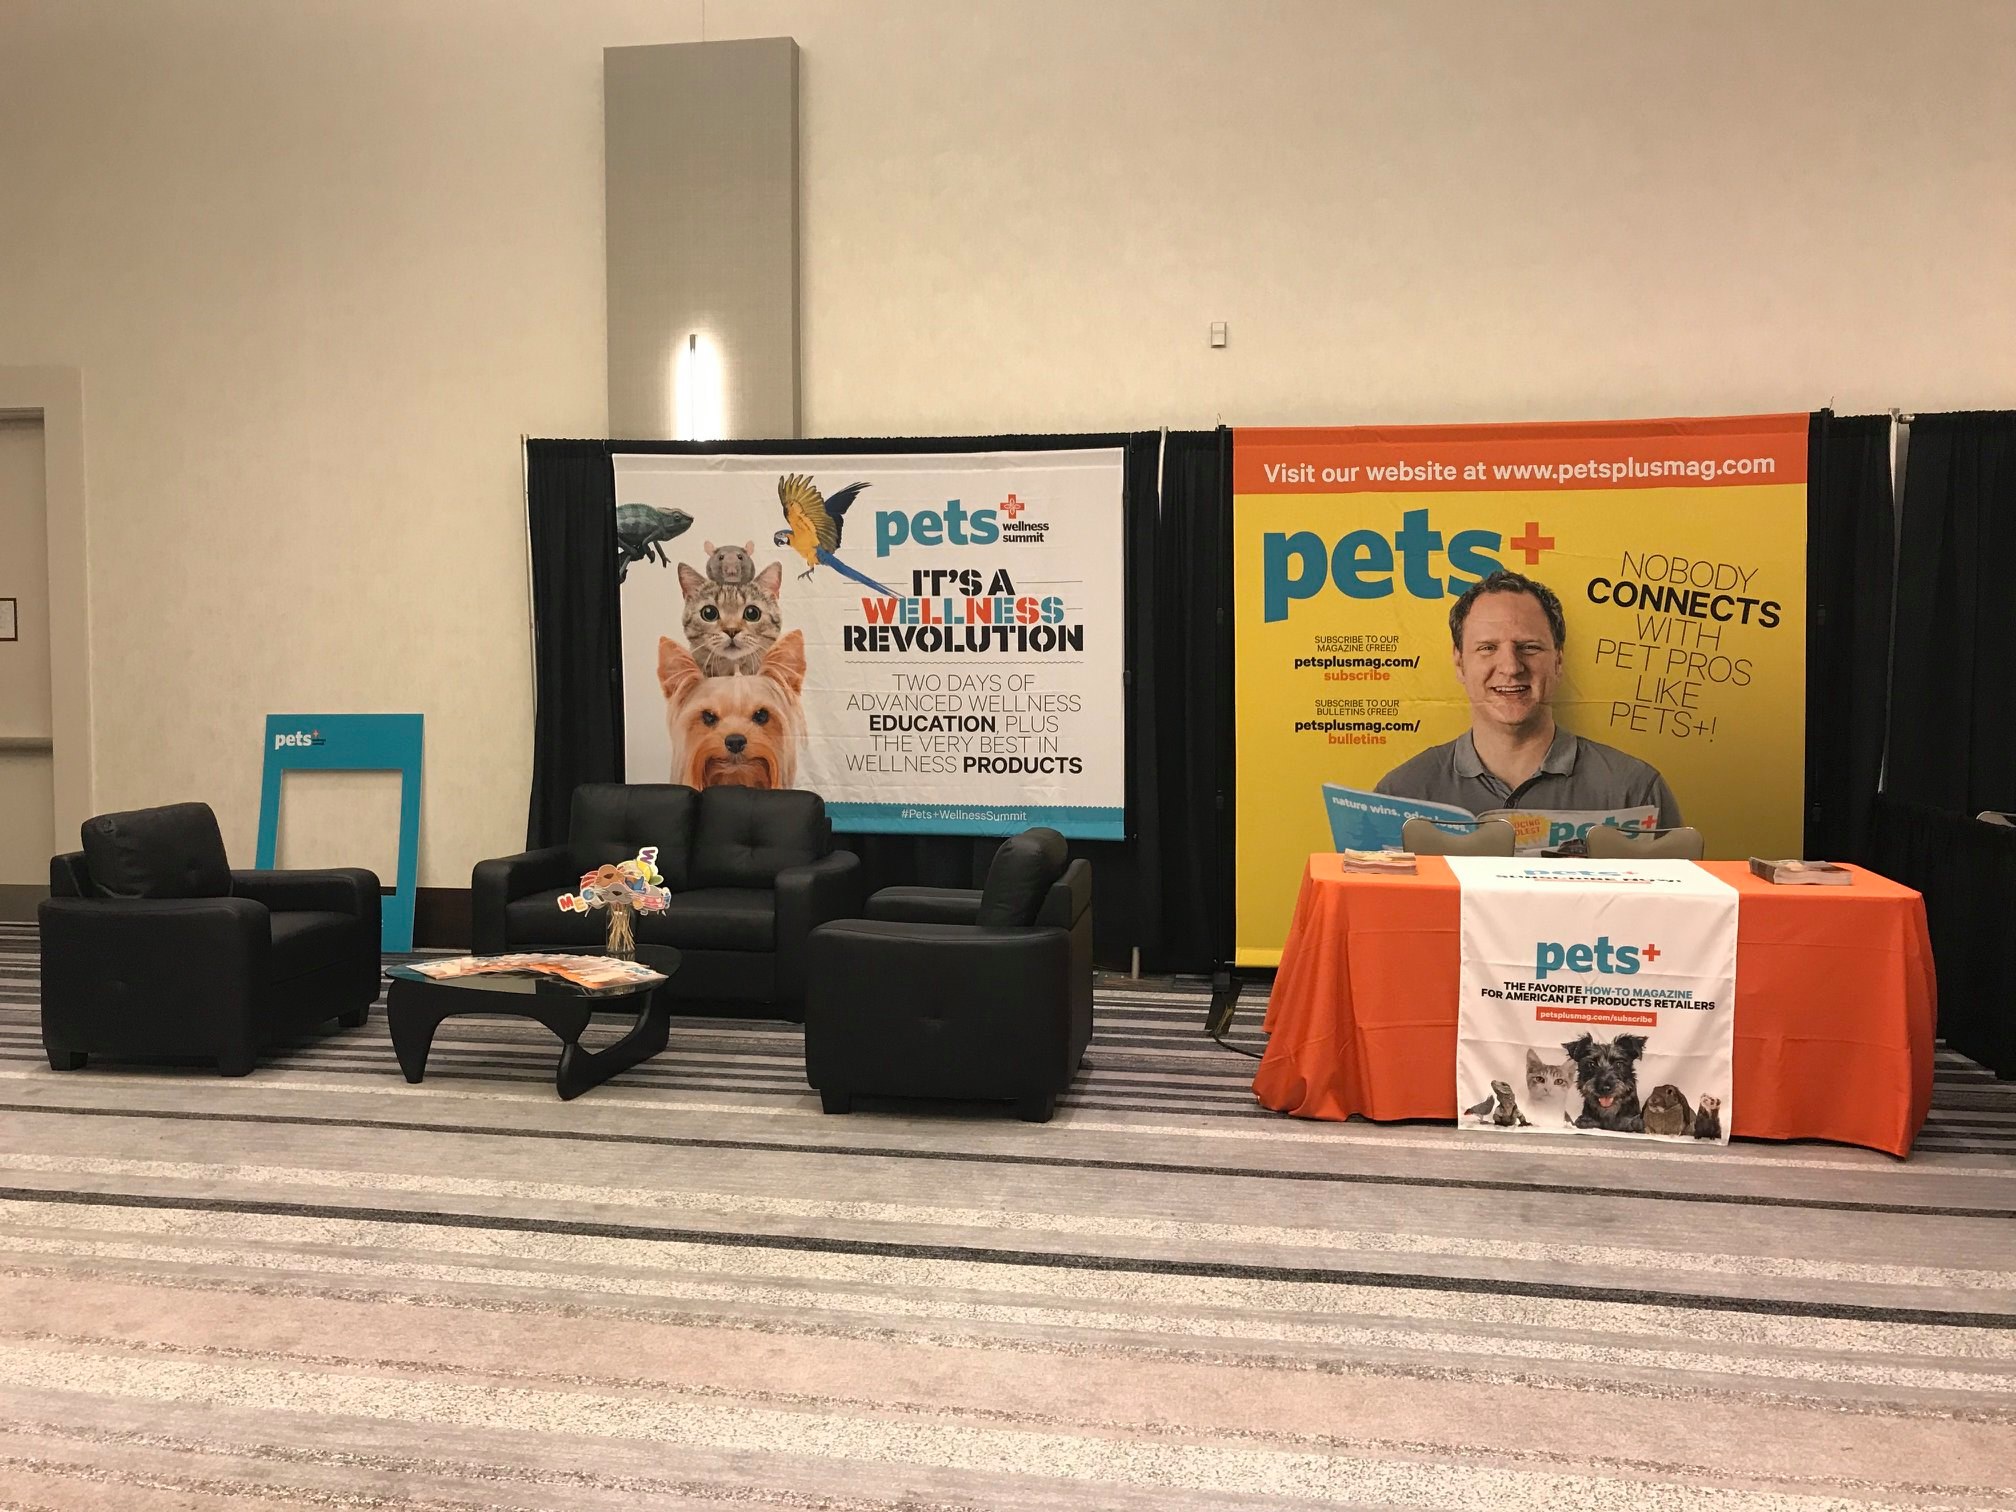 Gallery: See How Much Fun We Had at the Inaugural PETS+ Wellness Summit!